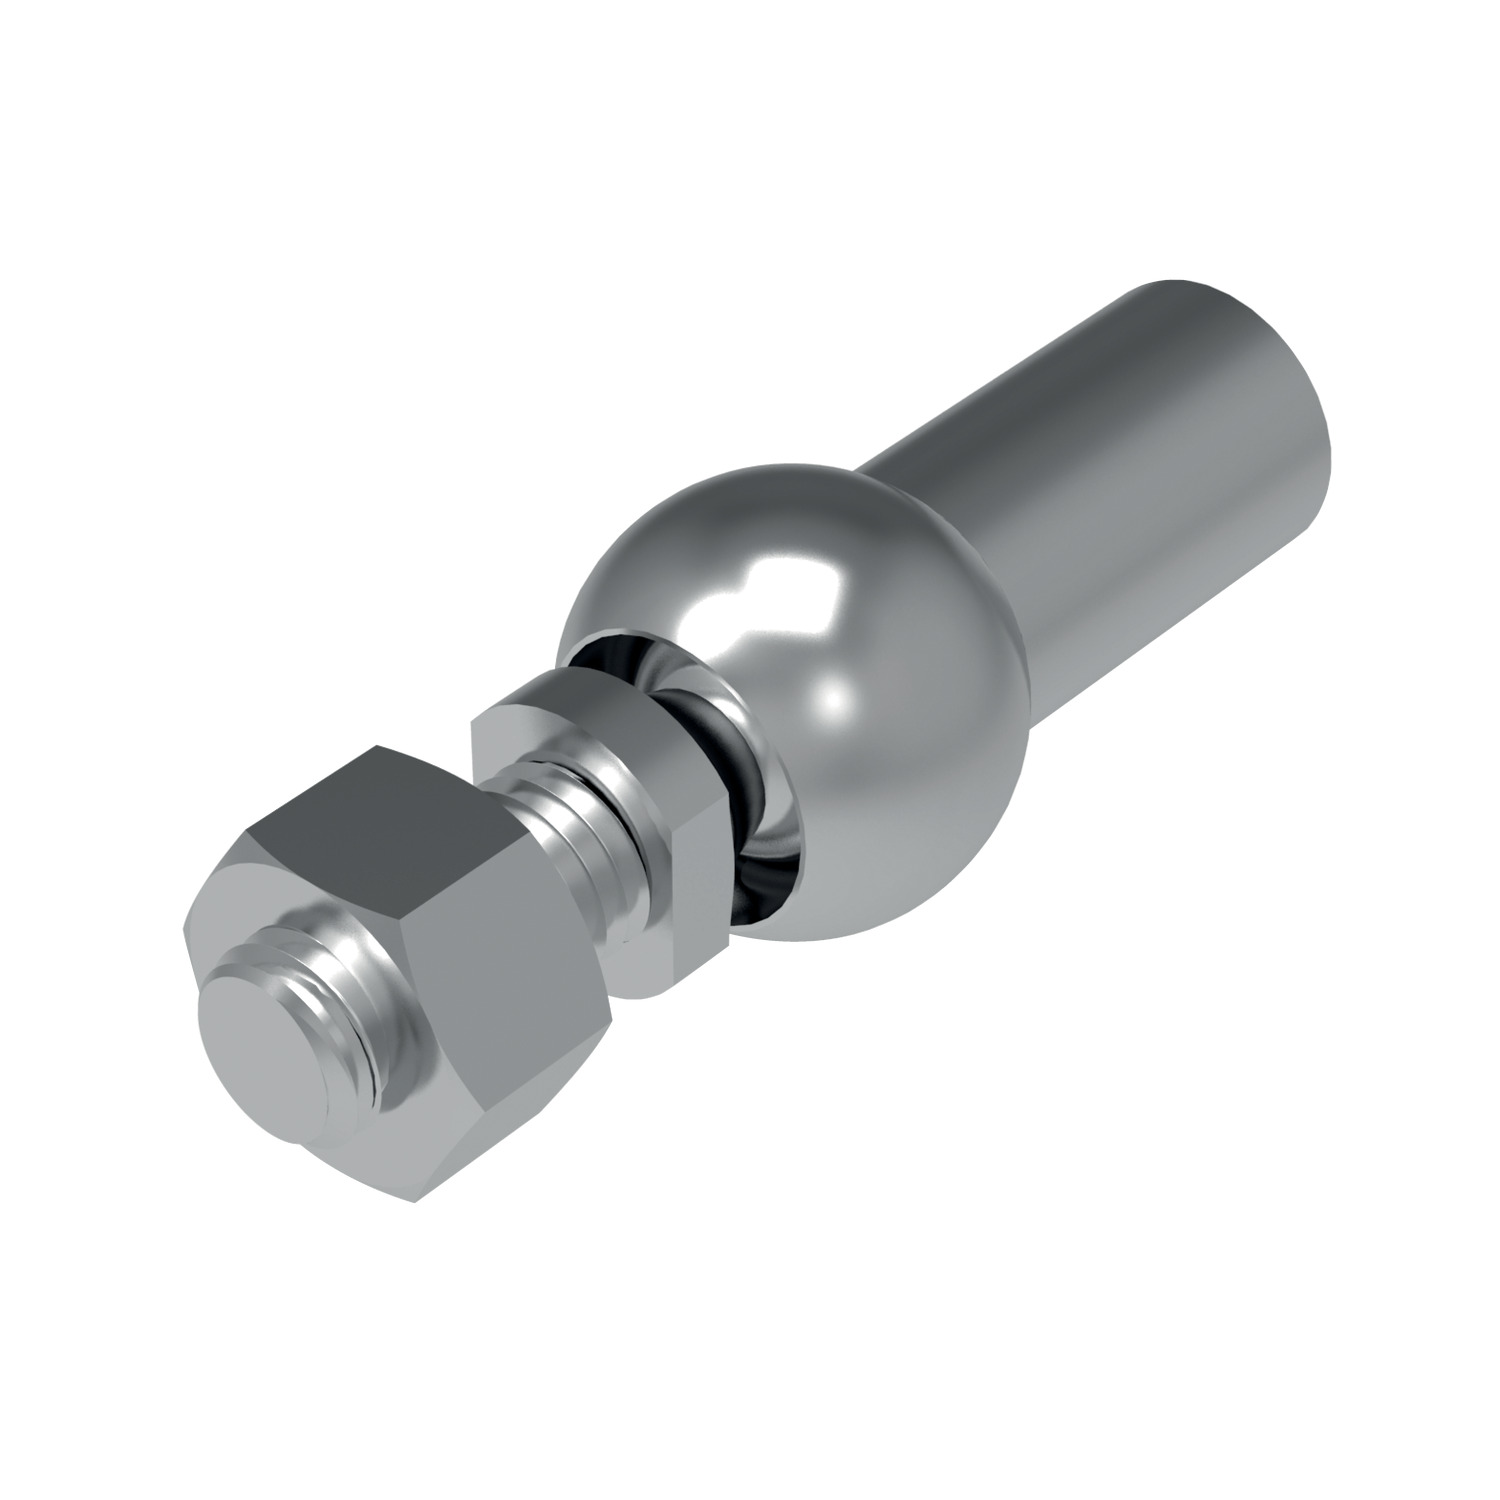 Product 65526, Stainless Axial Ball and Socket Joints left hand thread / 